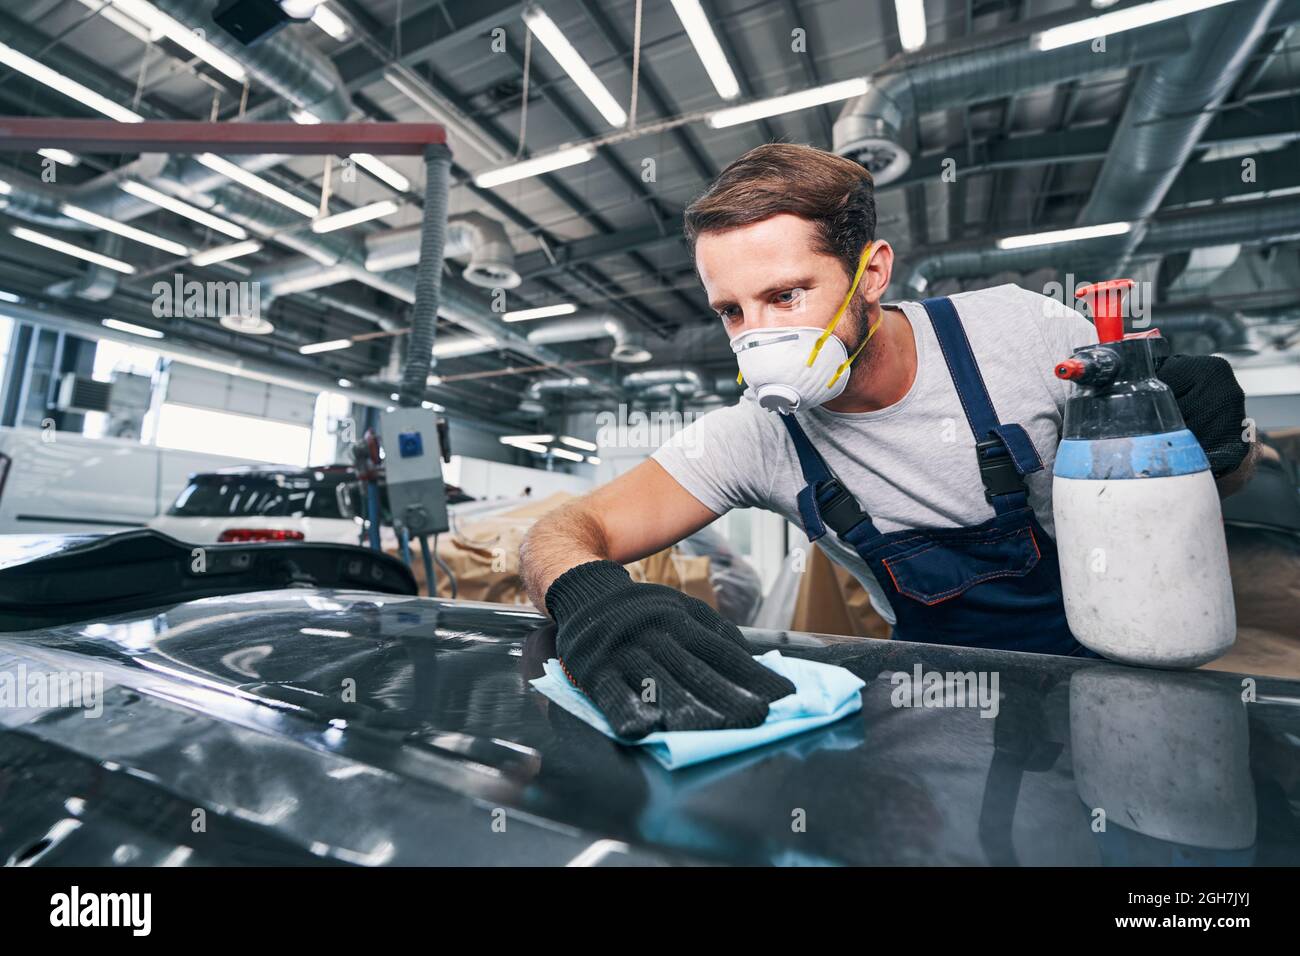 Focused man wiping automobile with cleaning cloth Stock Photo